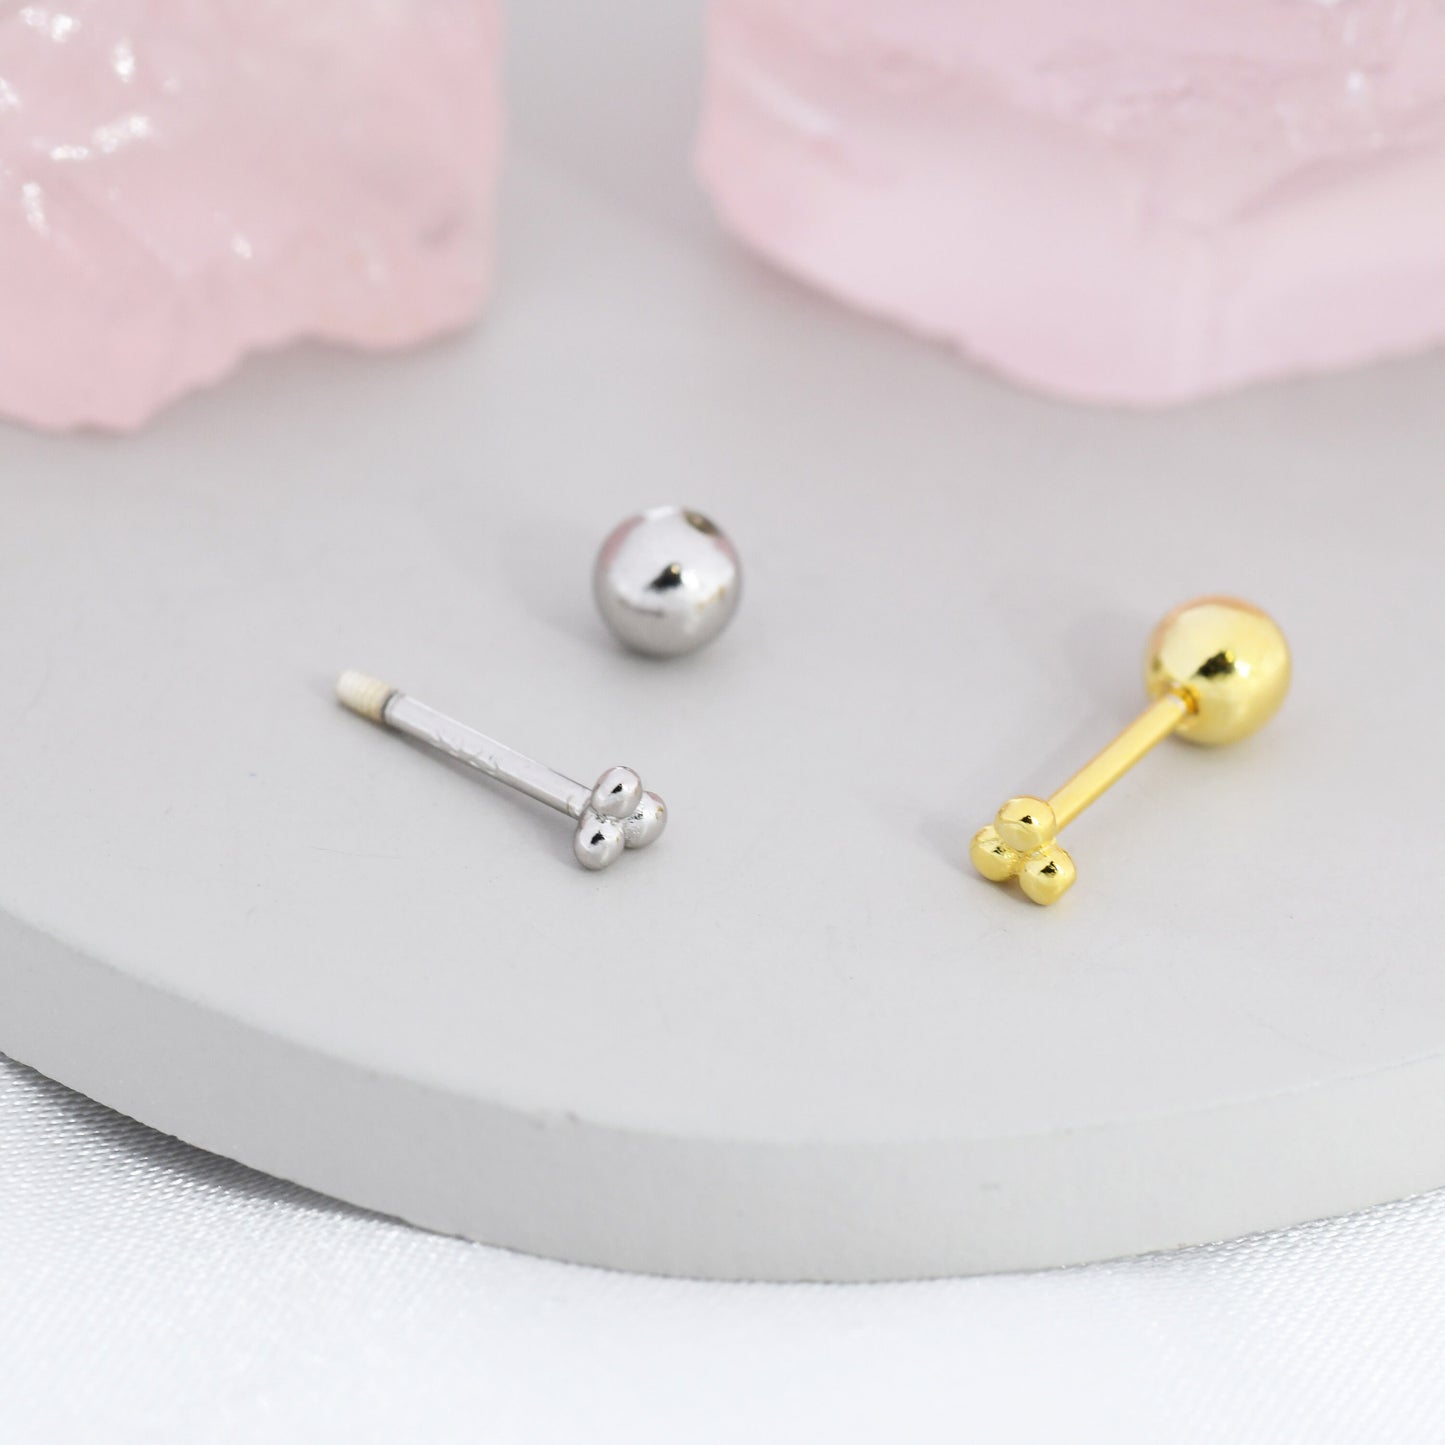 Extra Tiny Three Ball Barbell Earrings in Sterling Silver, Silver or Gold, Screw back Three Dot Earrings, Minimalist Piercing Jewellery